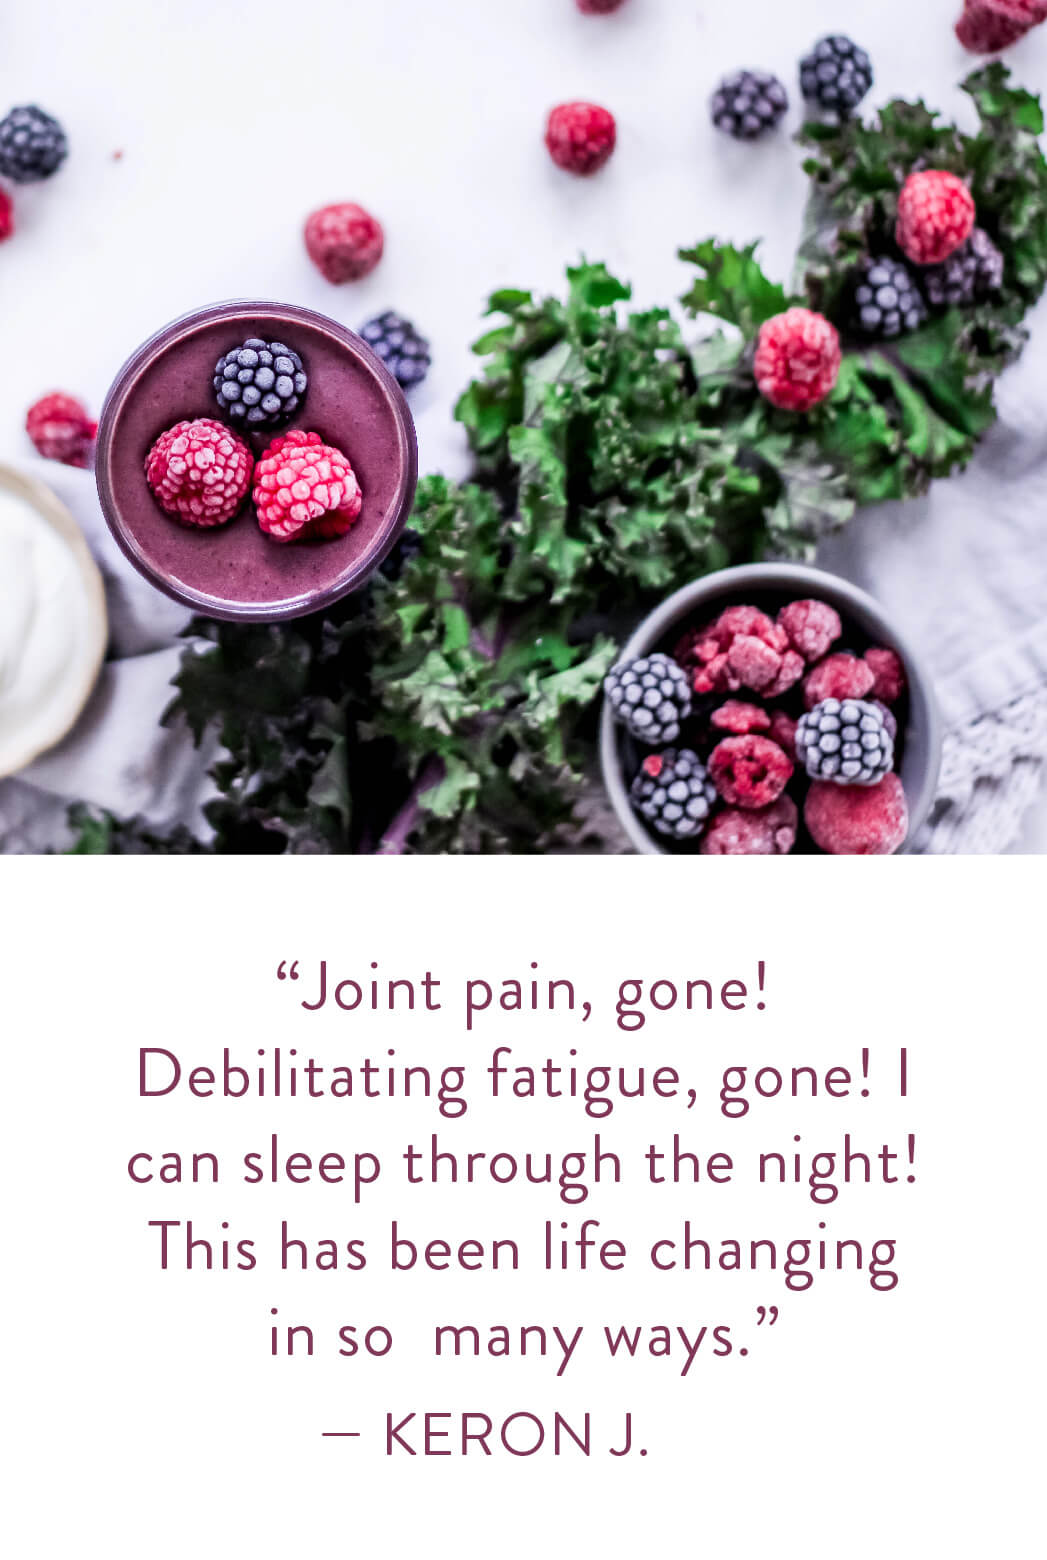 "Join pain, gone! Debilitating fatique, gone! I can sleep through the night! This has been life changing in so many ways." - Keron J.